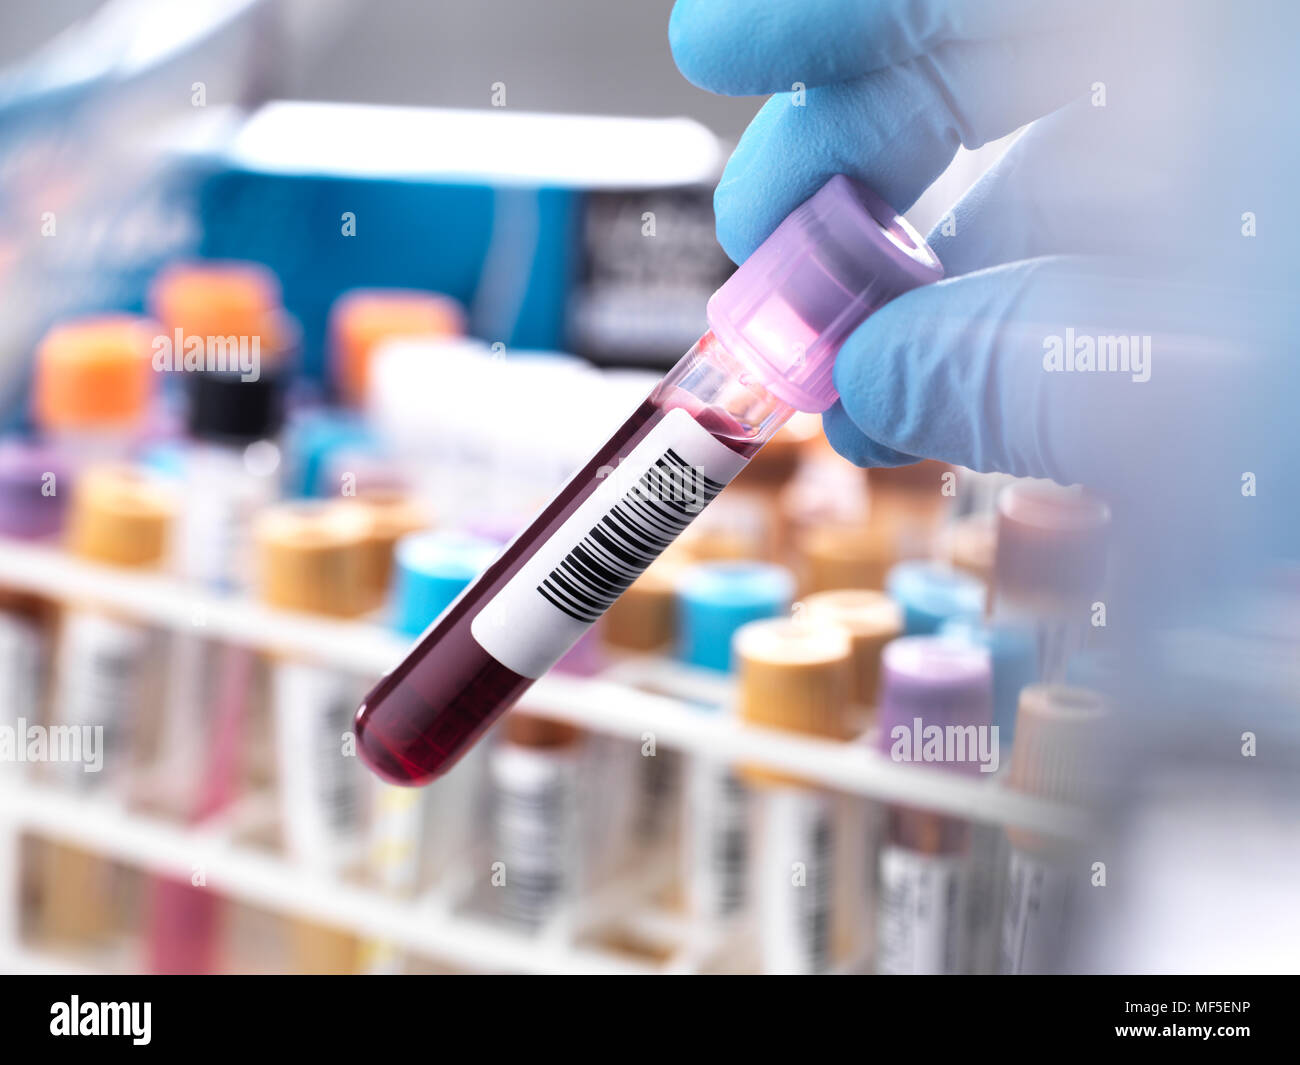 Medical technician preparing a human blood sample for clinical testing Stock Photo